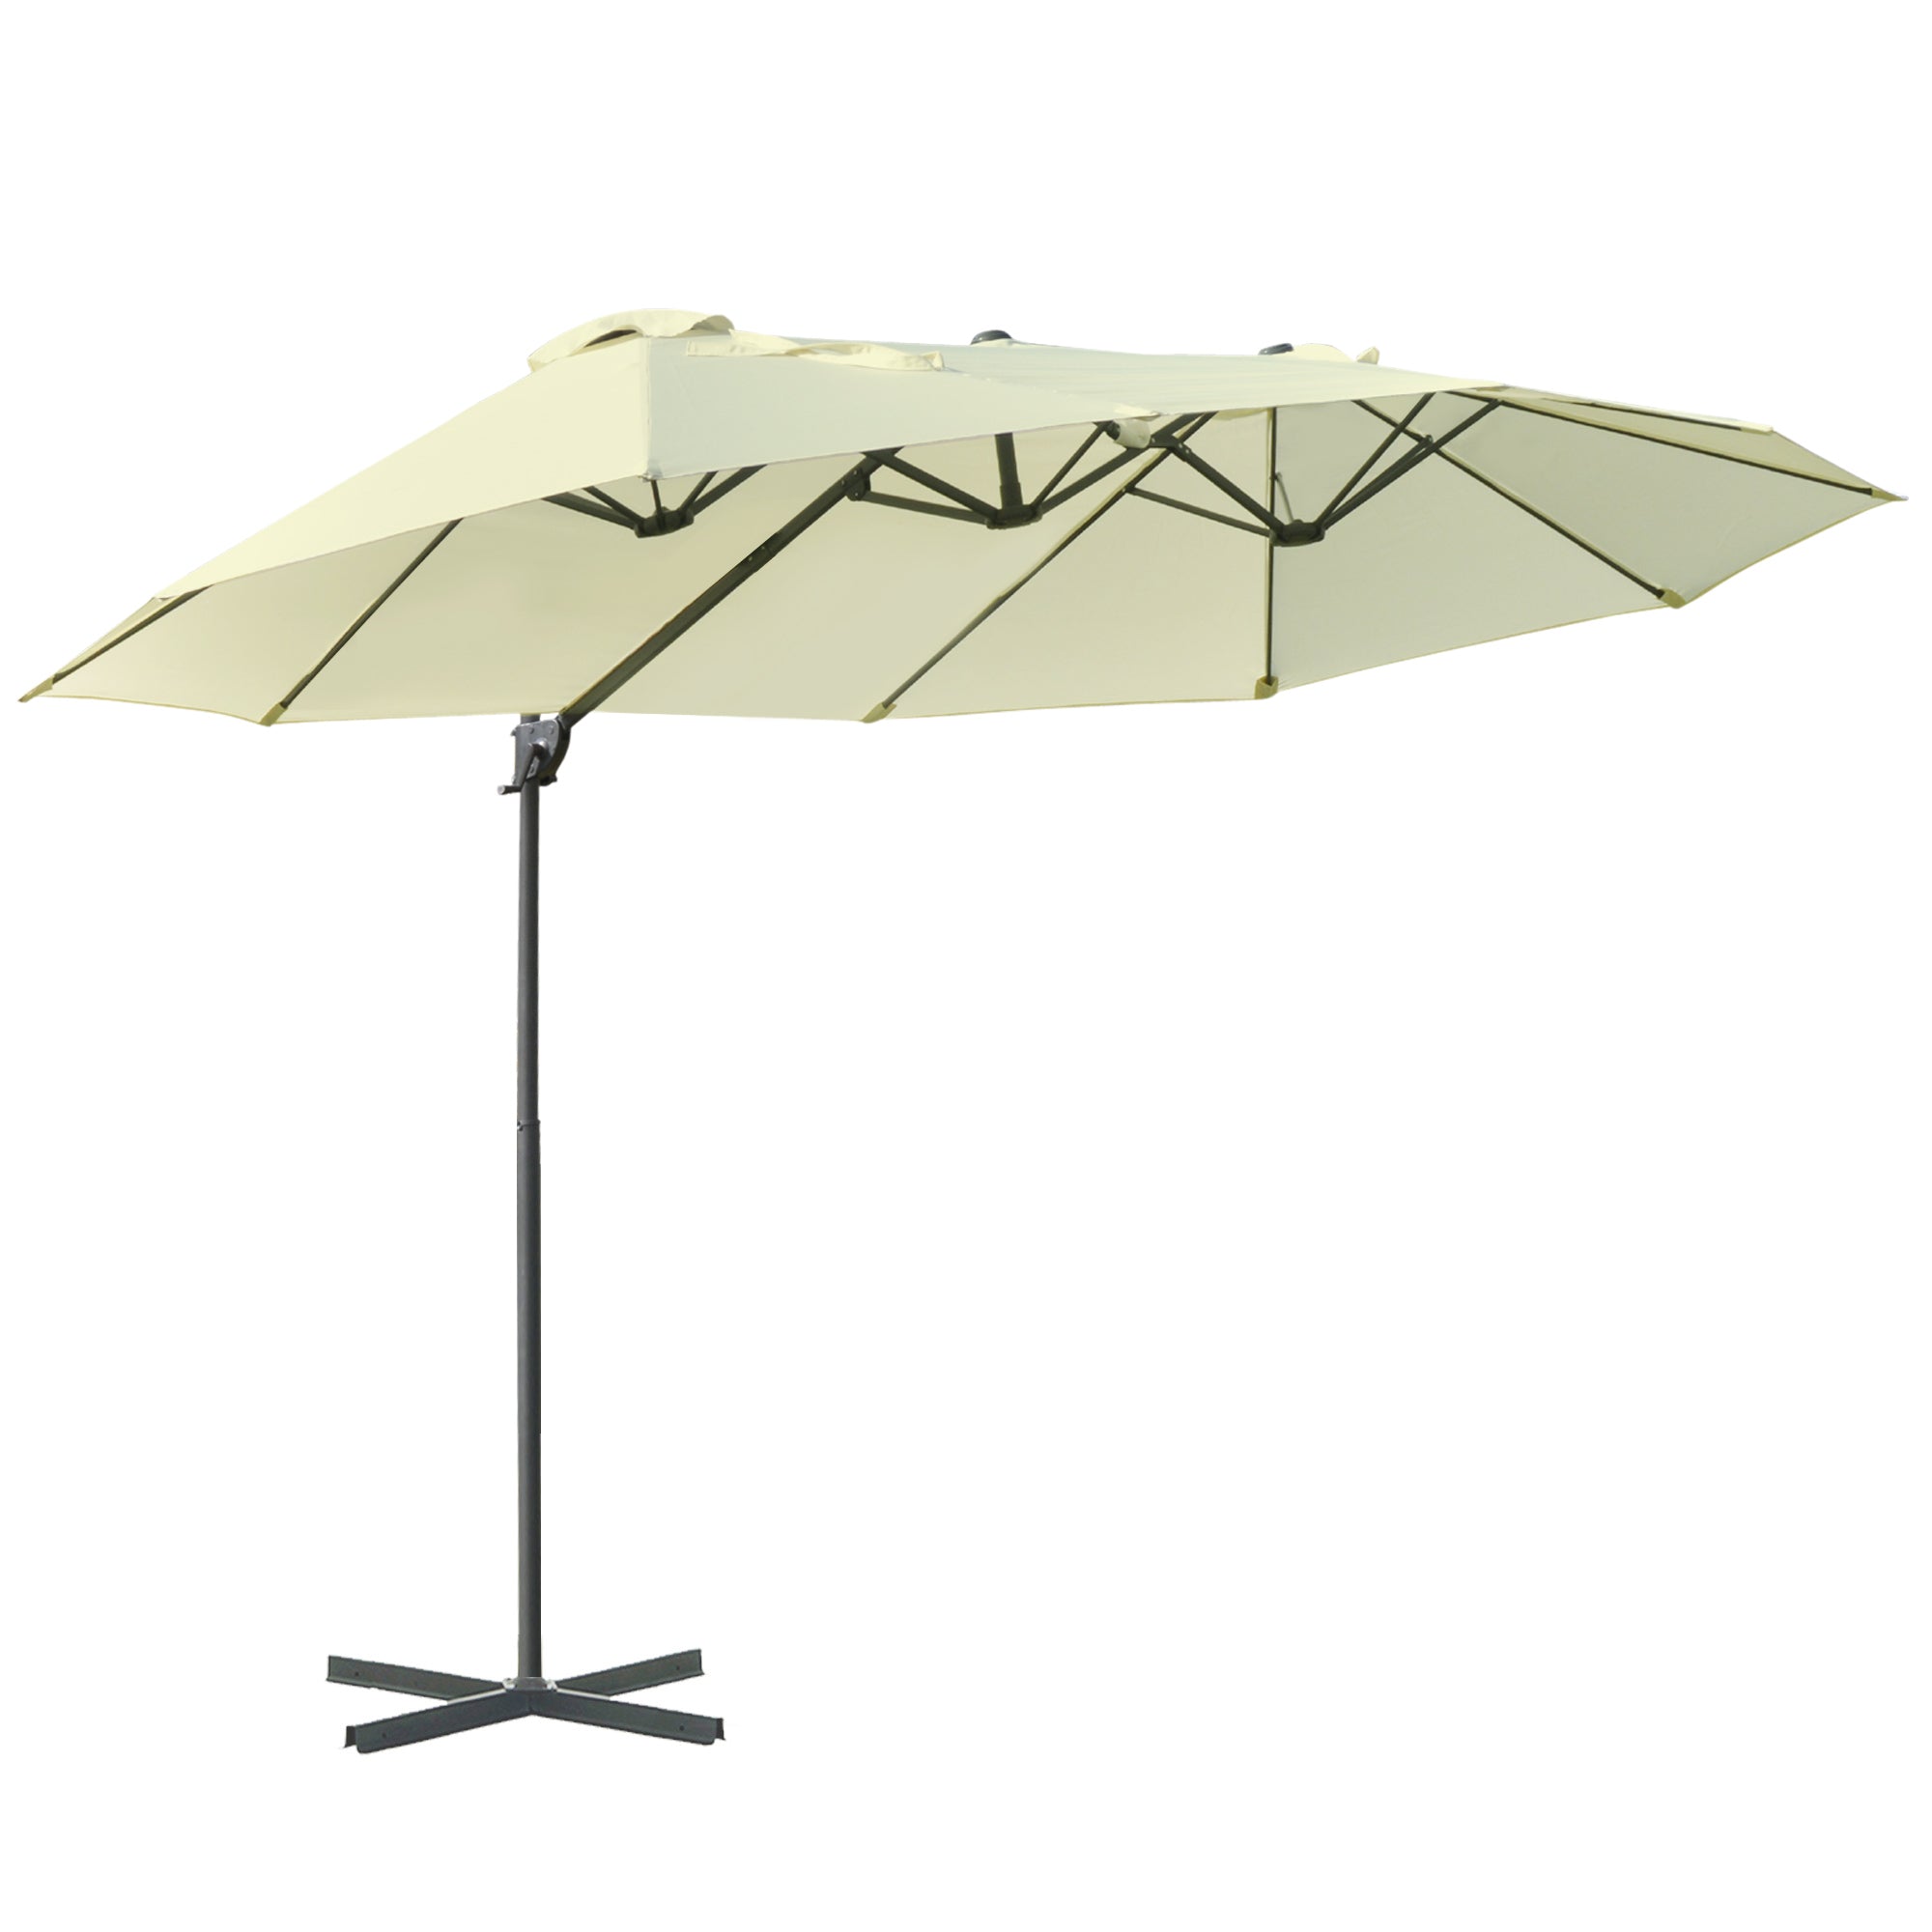 Outsunny Double Canopy Offset Parasol Umbrella Garden Shade Steel Canopy Beige